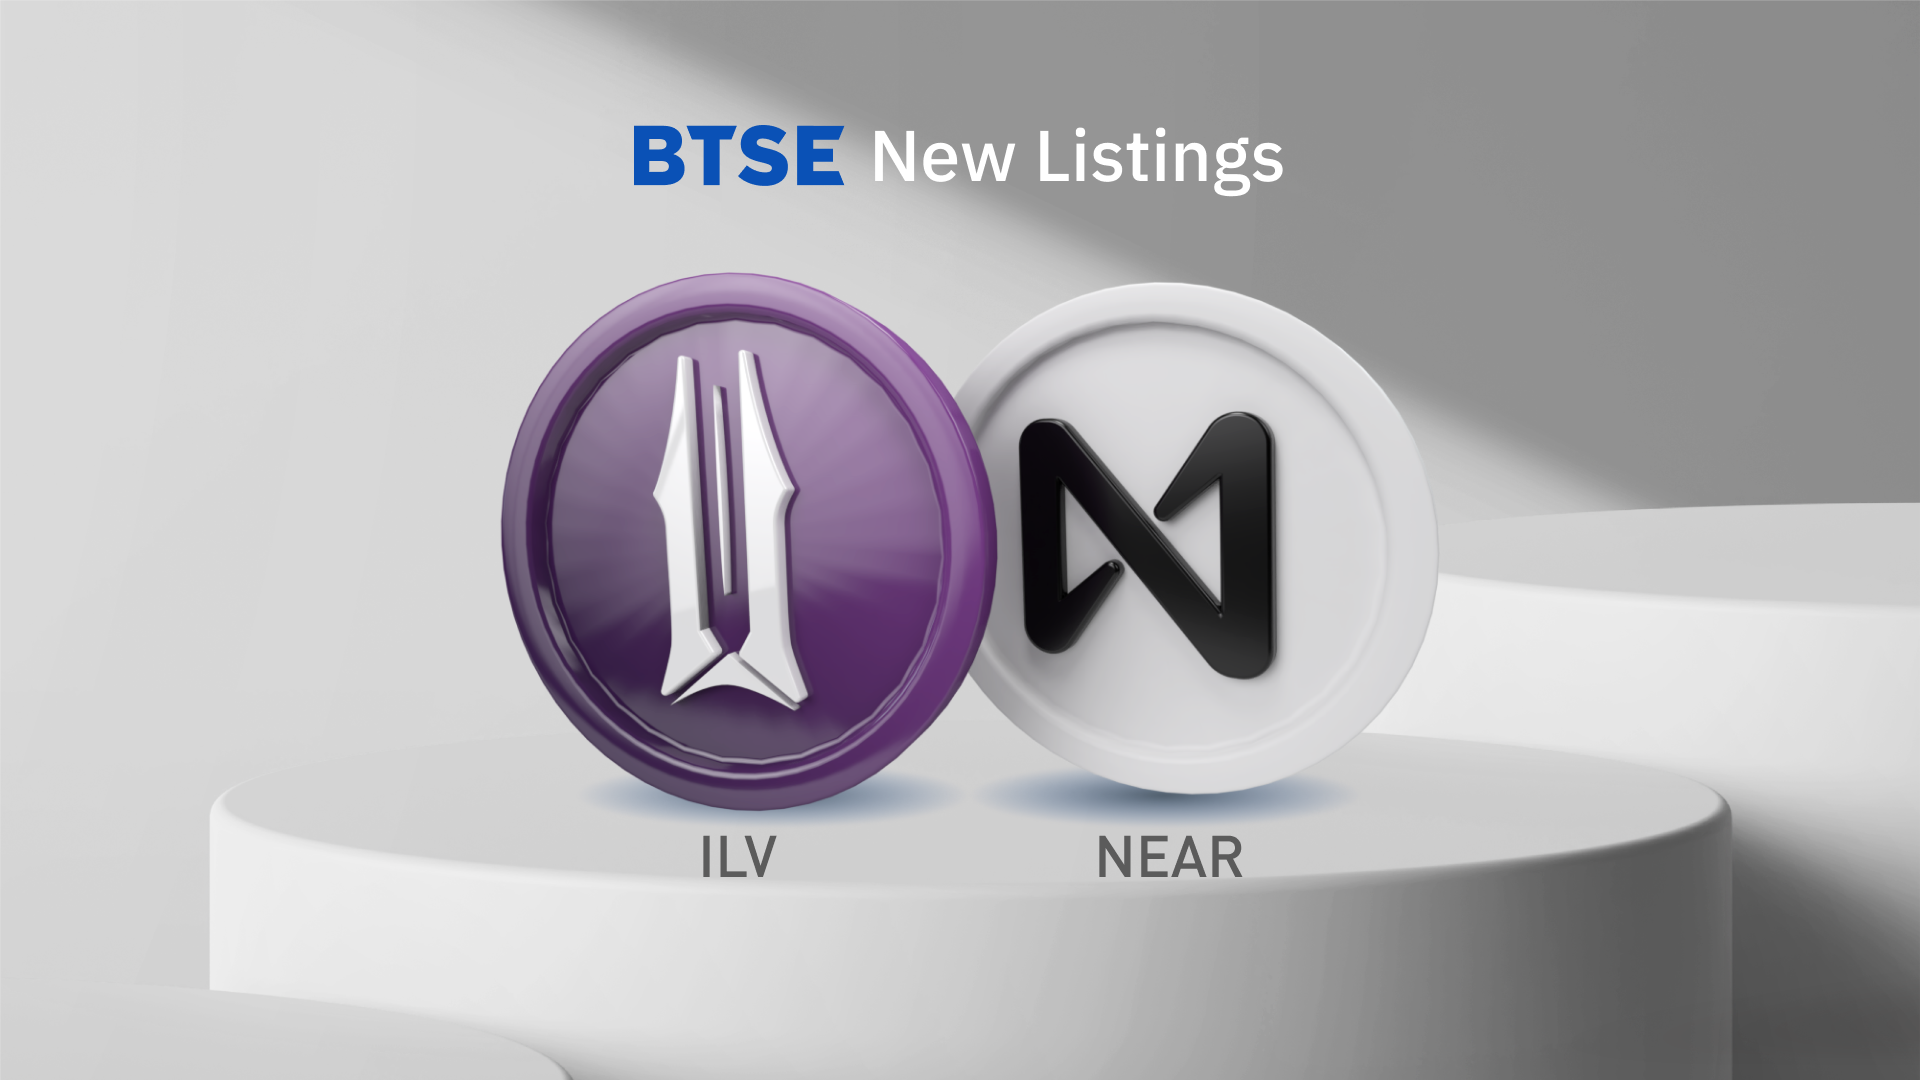 BTSE Welcomes ILV and NEAR